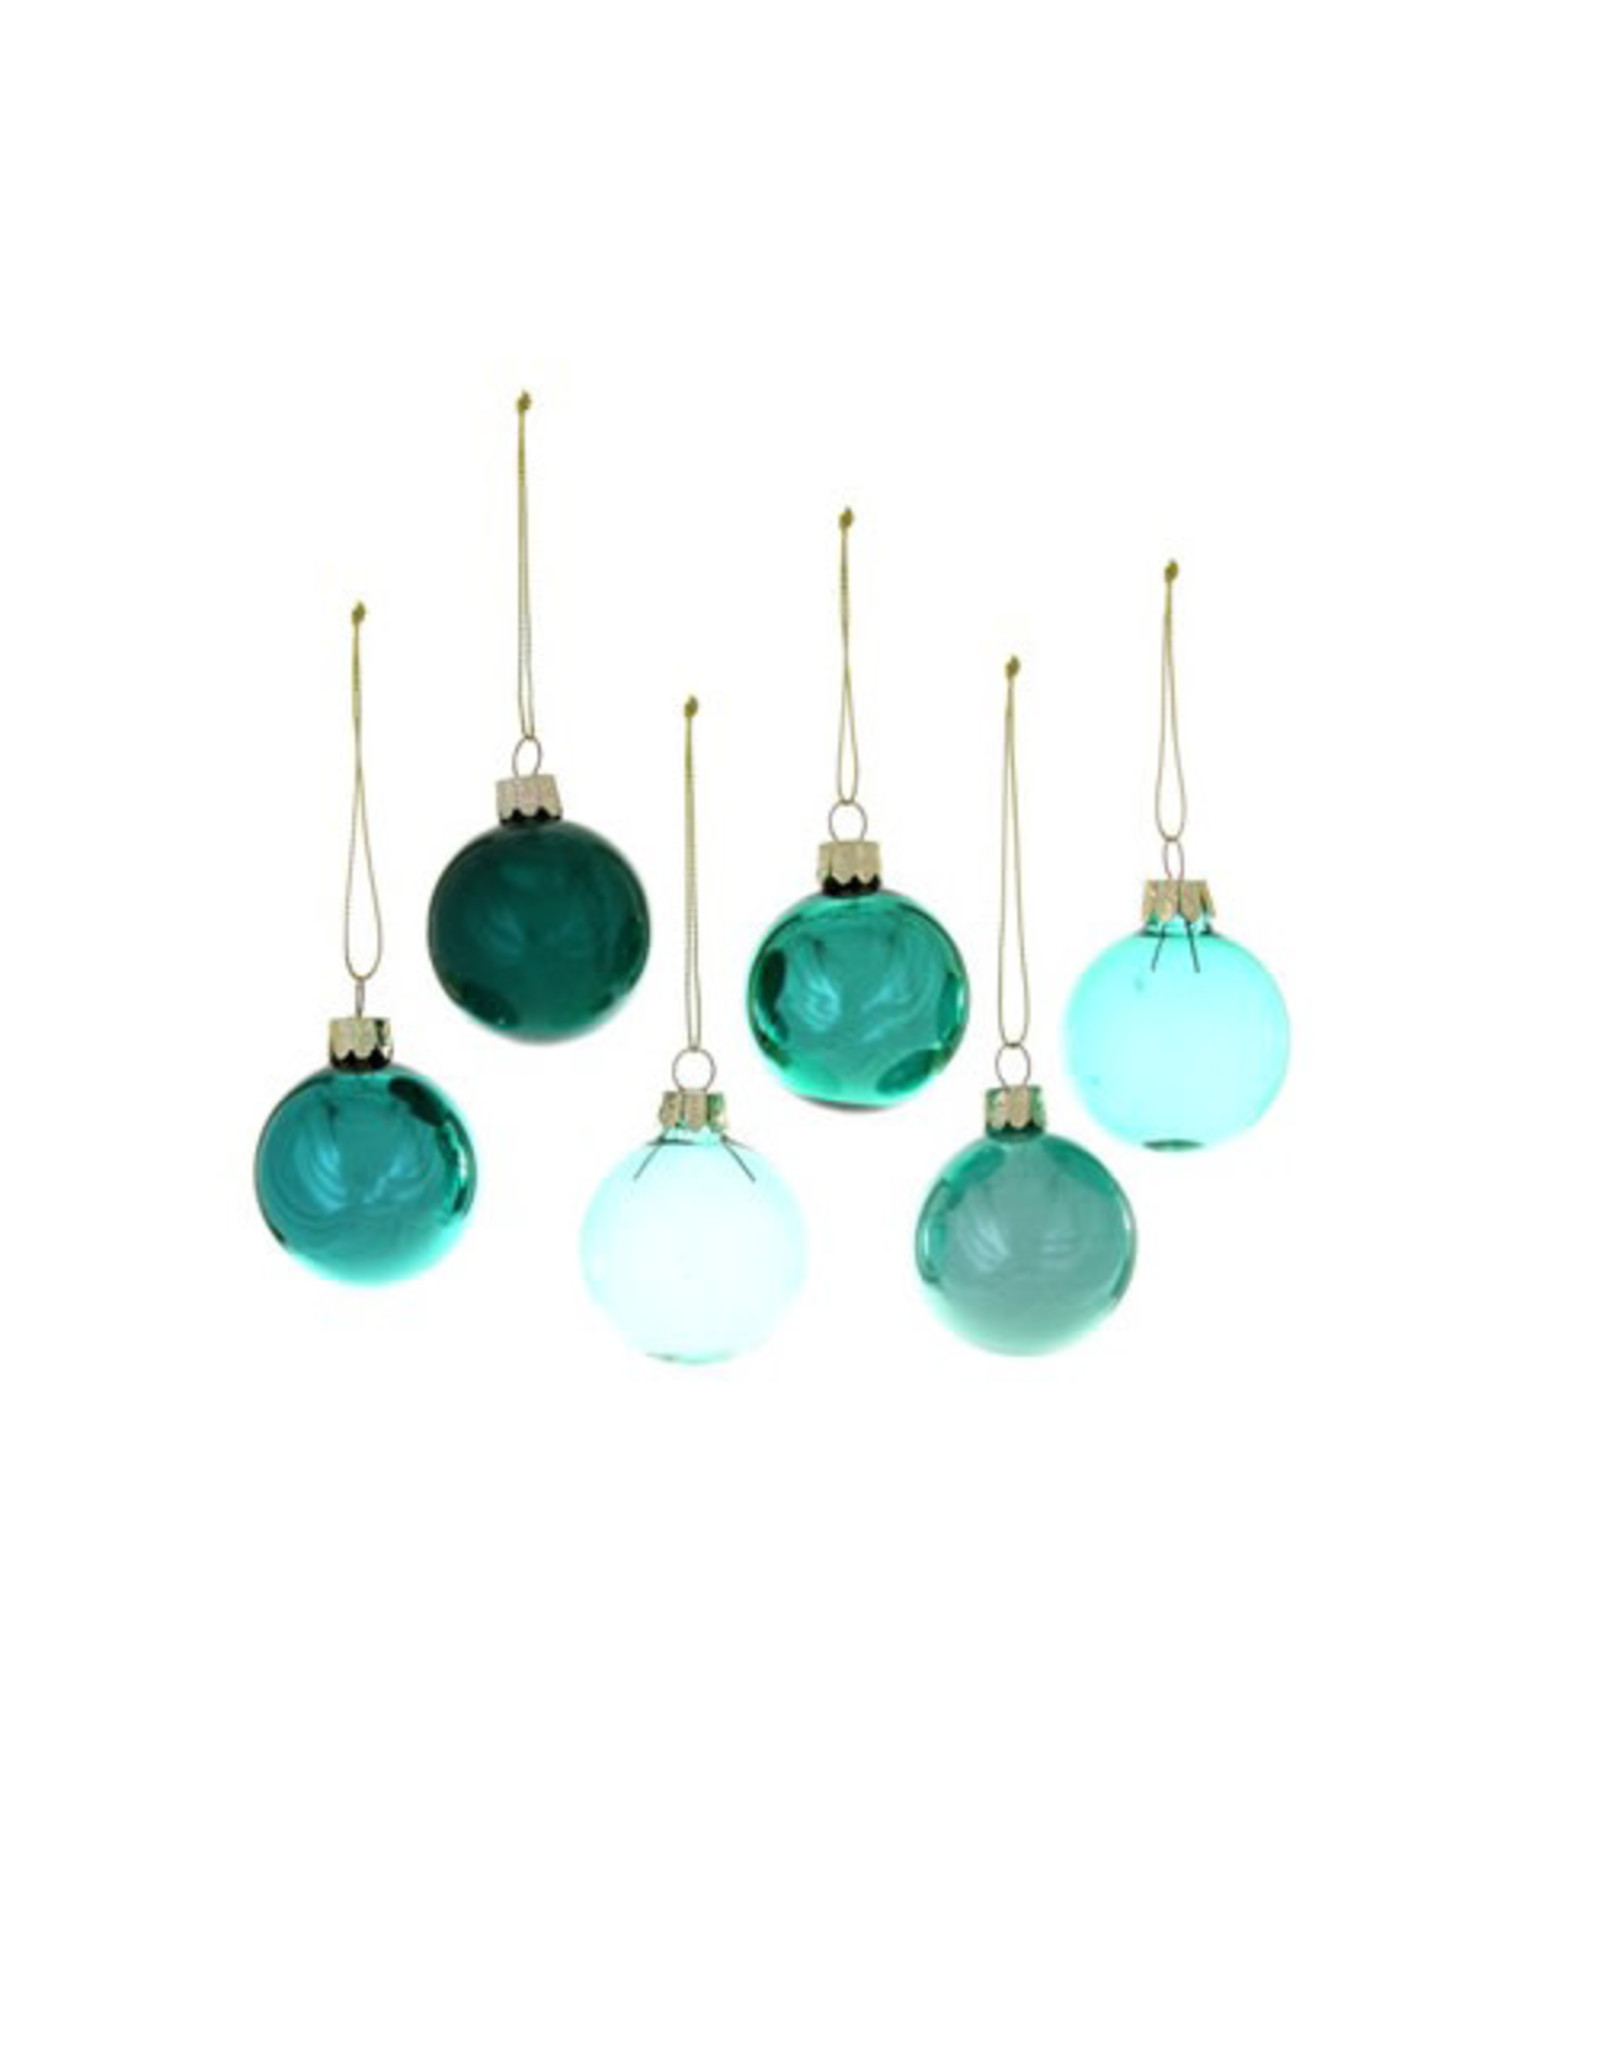 Cody Foster & Co. SMALL TEAL HUE ORNAMENTS - 6 STYLES